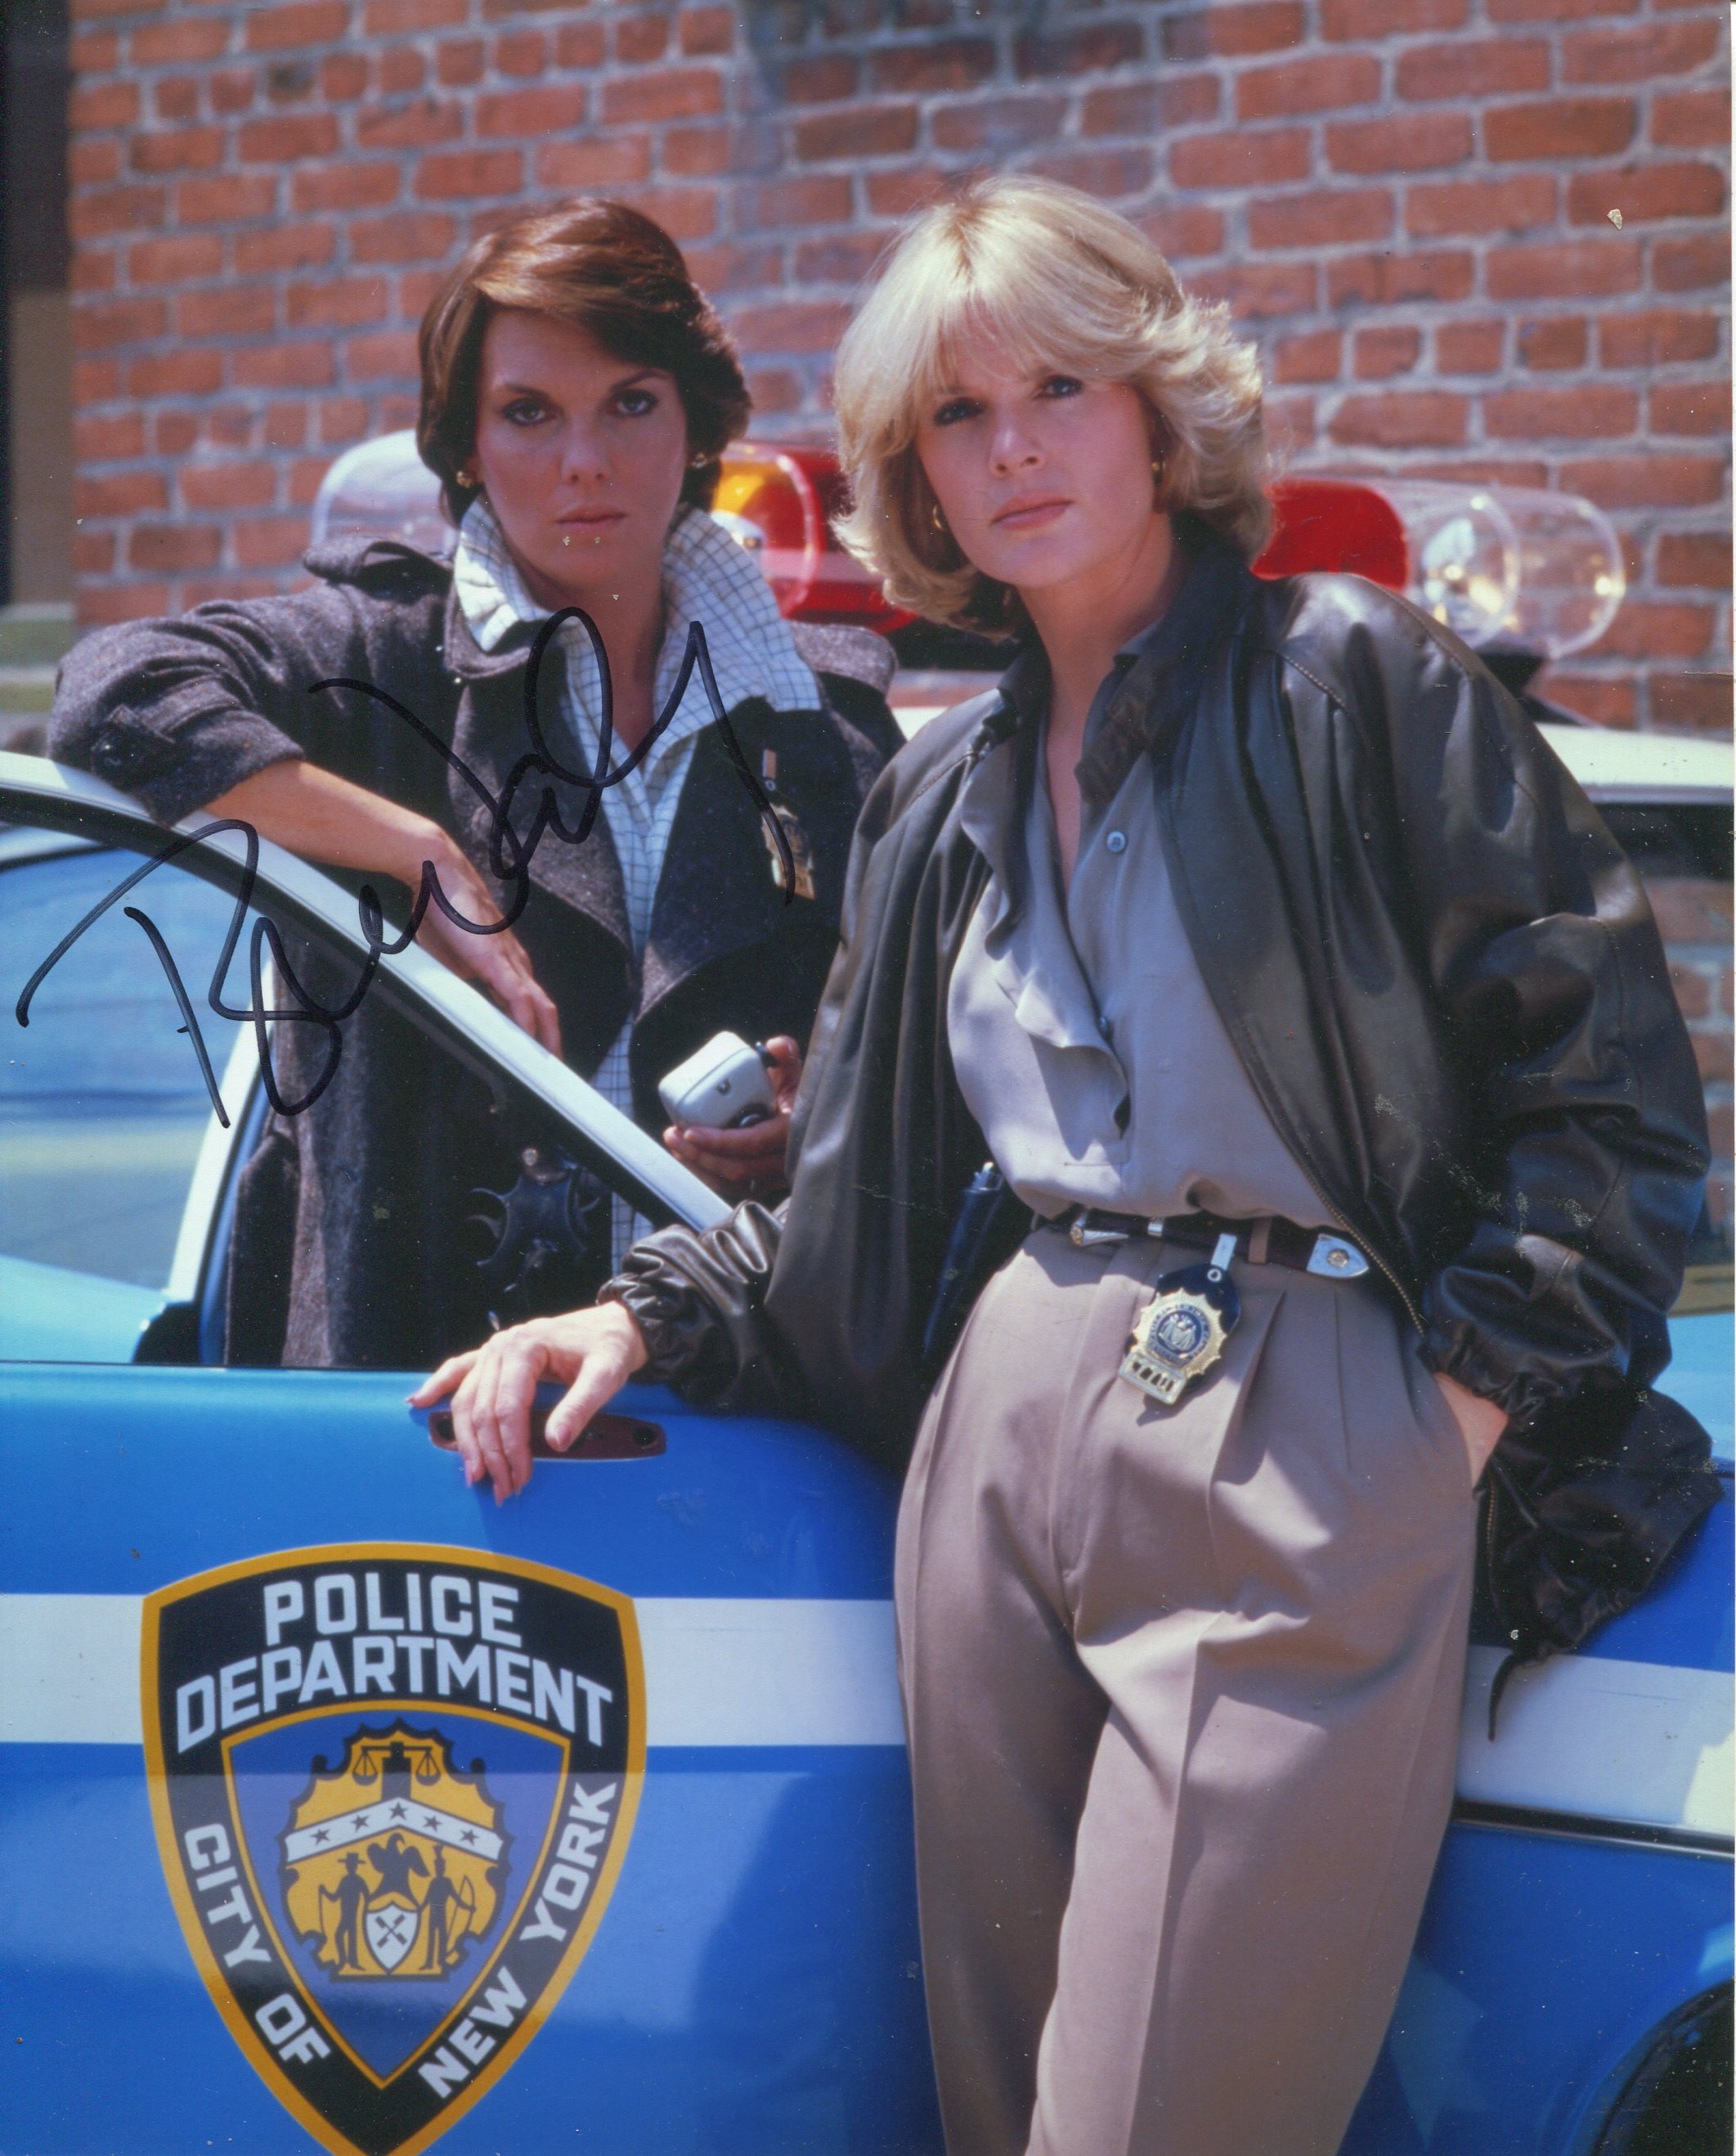 CAGNEY & LACEY classic cop drama series photo signed by actress Tyne Daly. Good Condition. All